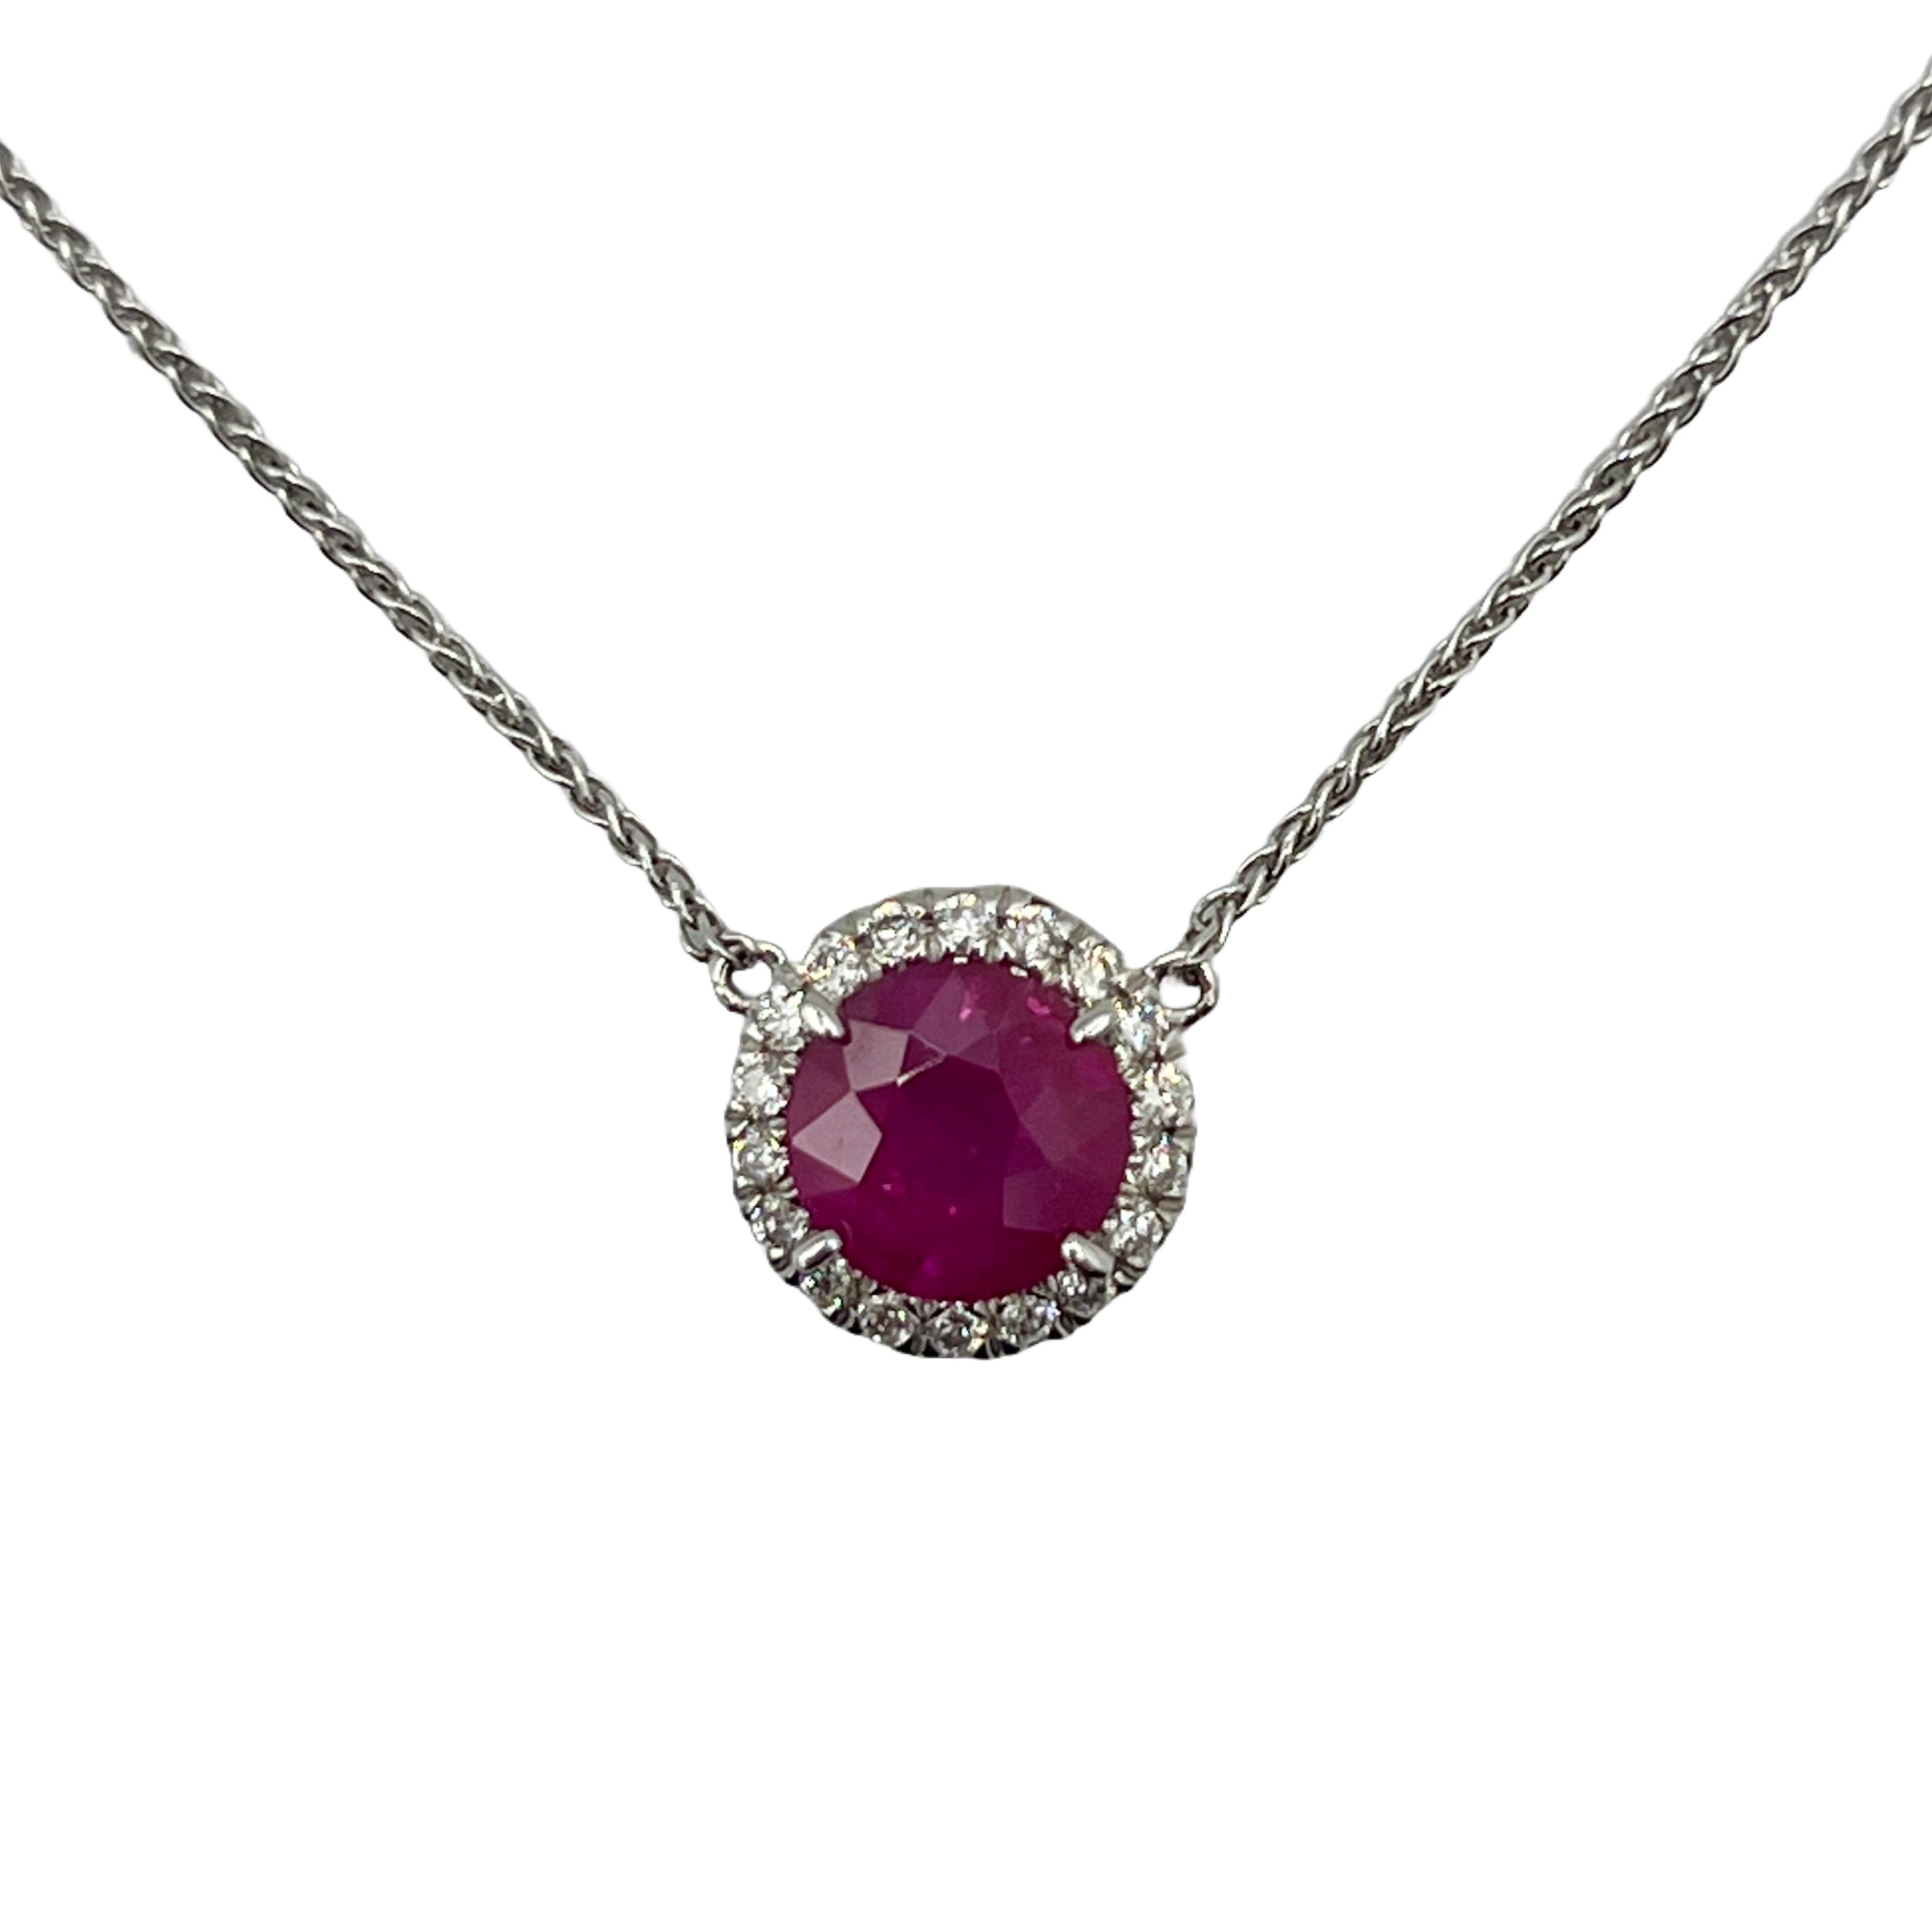 Pendant 18KW/0.9G 1RUBY-1.64CT 18RD-0.19CT